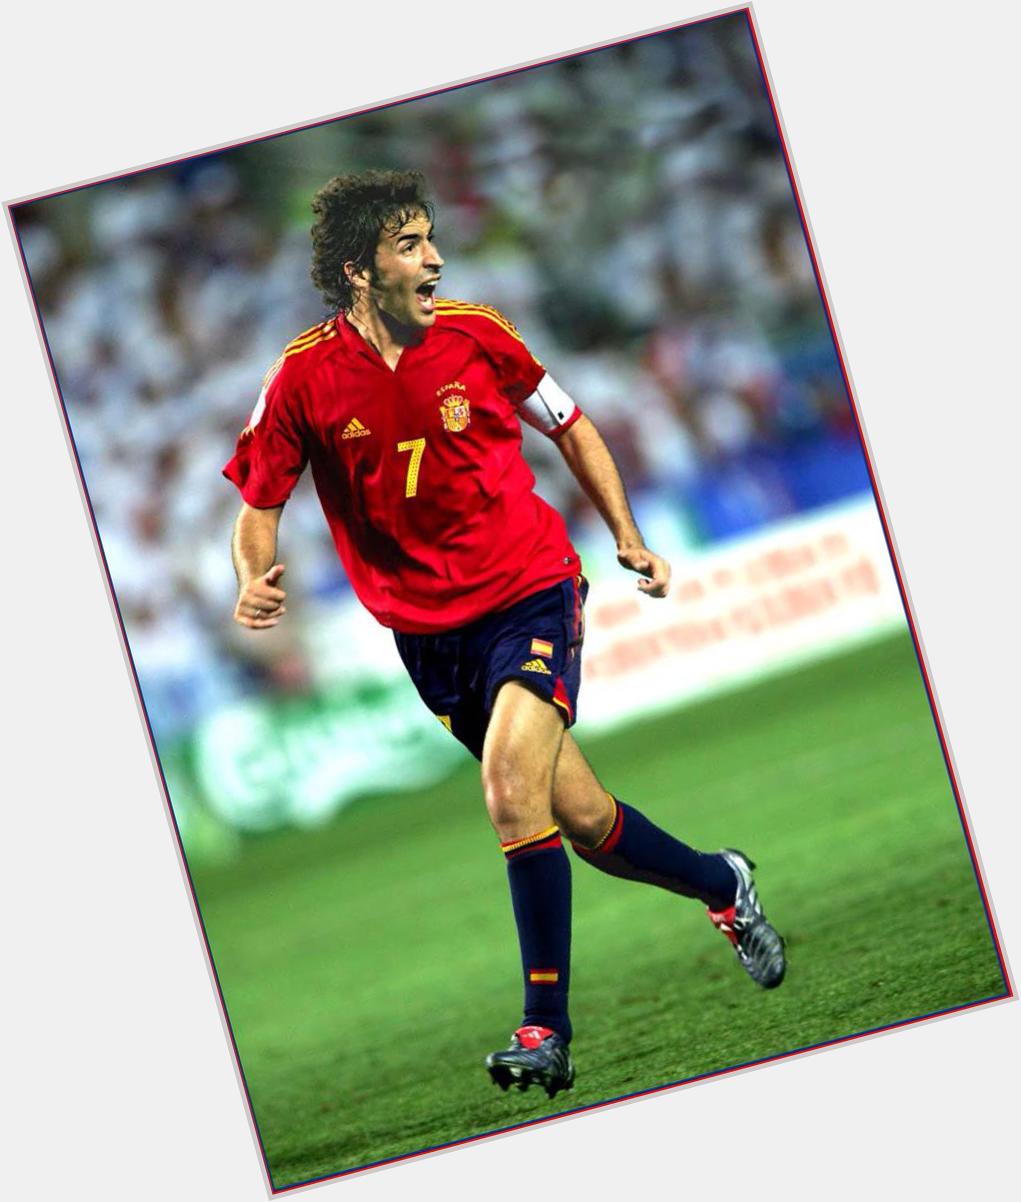 One of my favorite player of all time .The reason why I started loving football HAPPY 38th BIRTHDAY Raul Gonzalez 